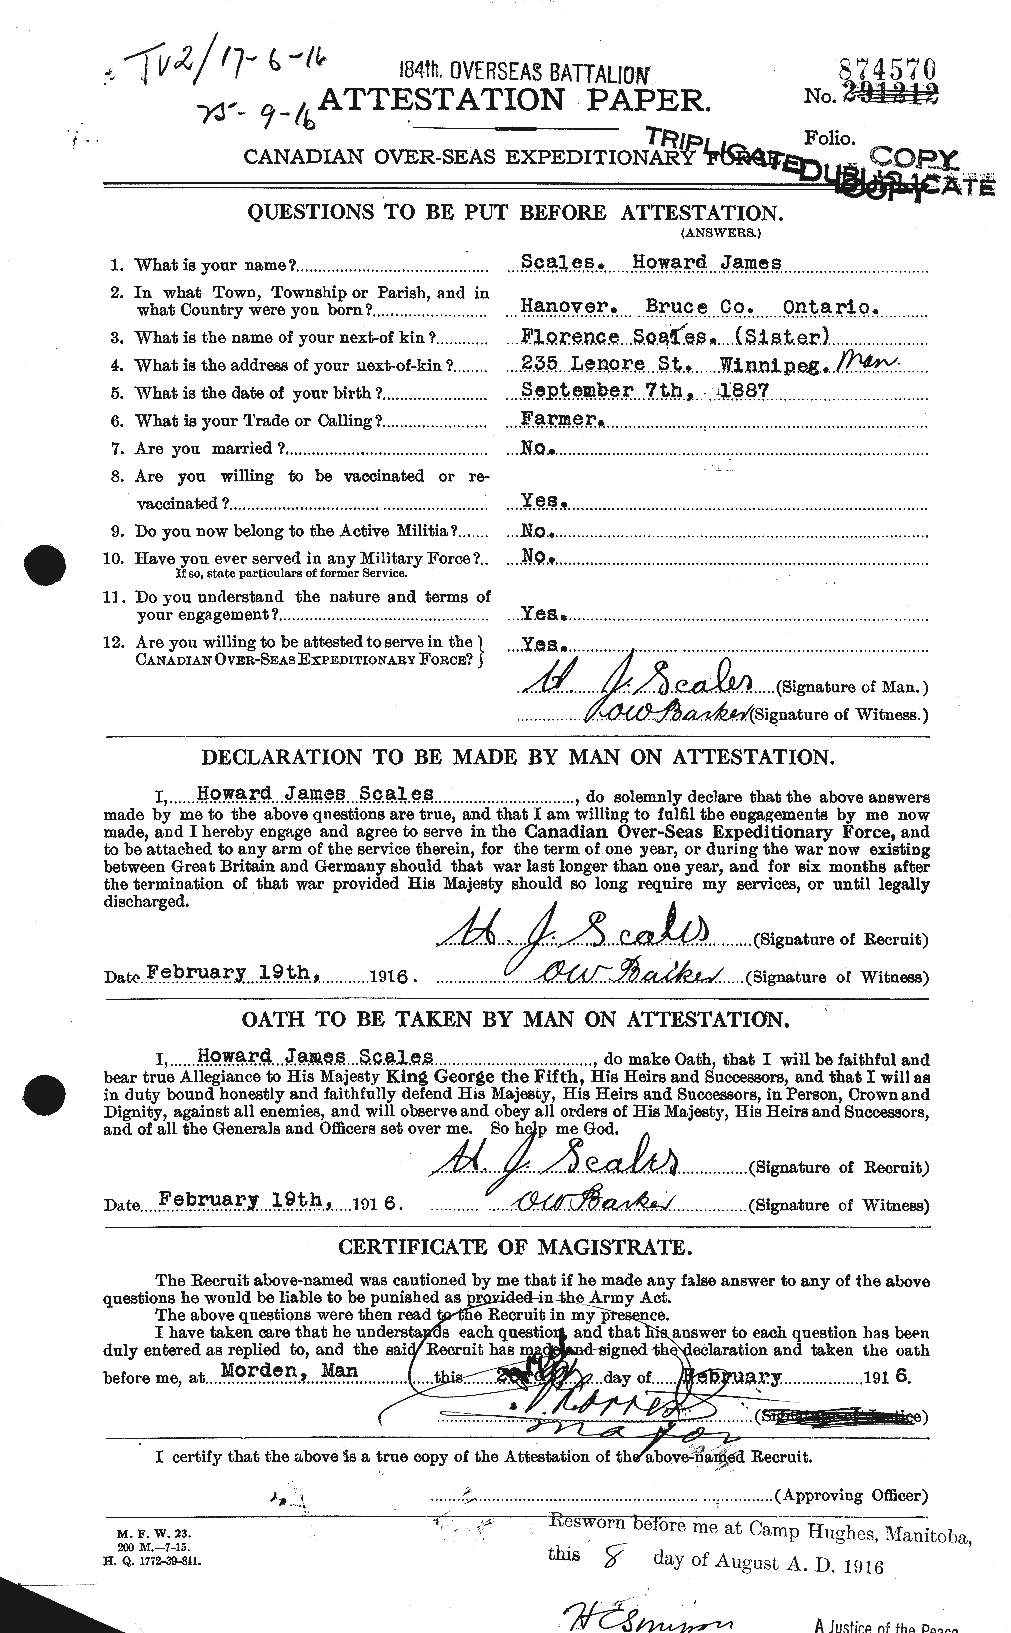 Personnel Records of the First World War - CEF 080794a